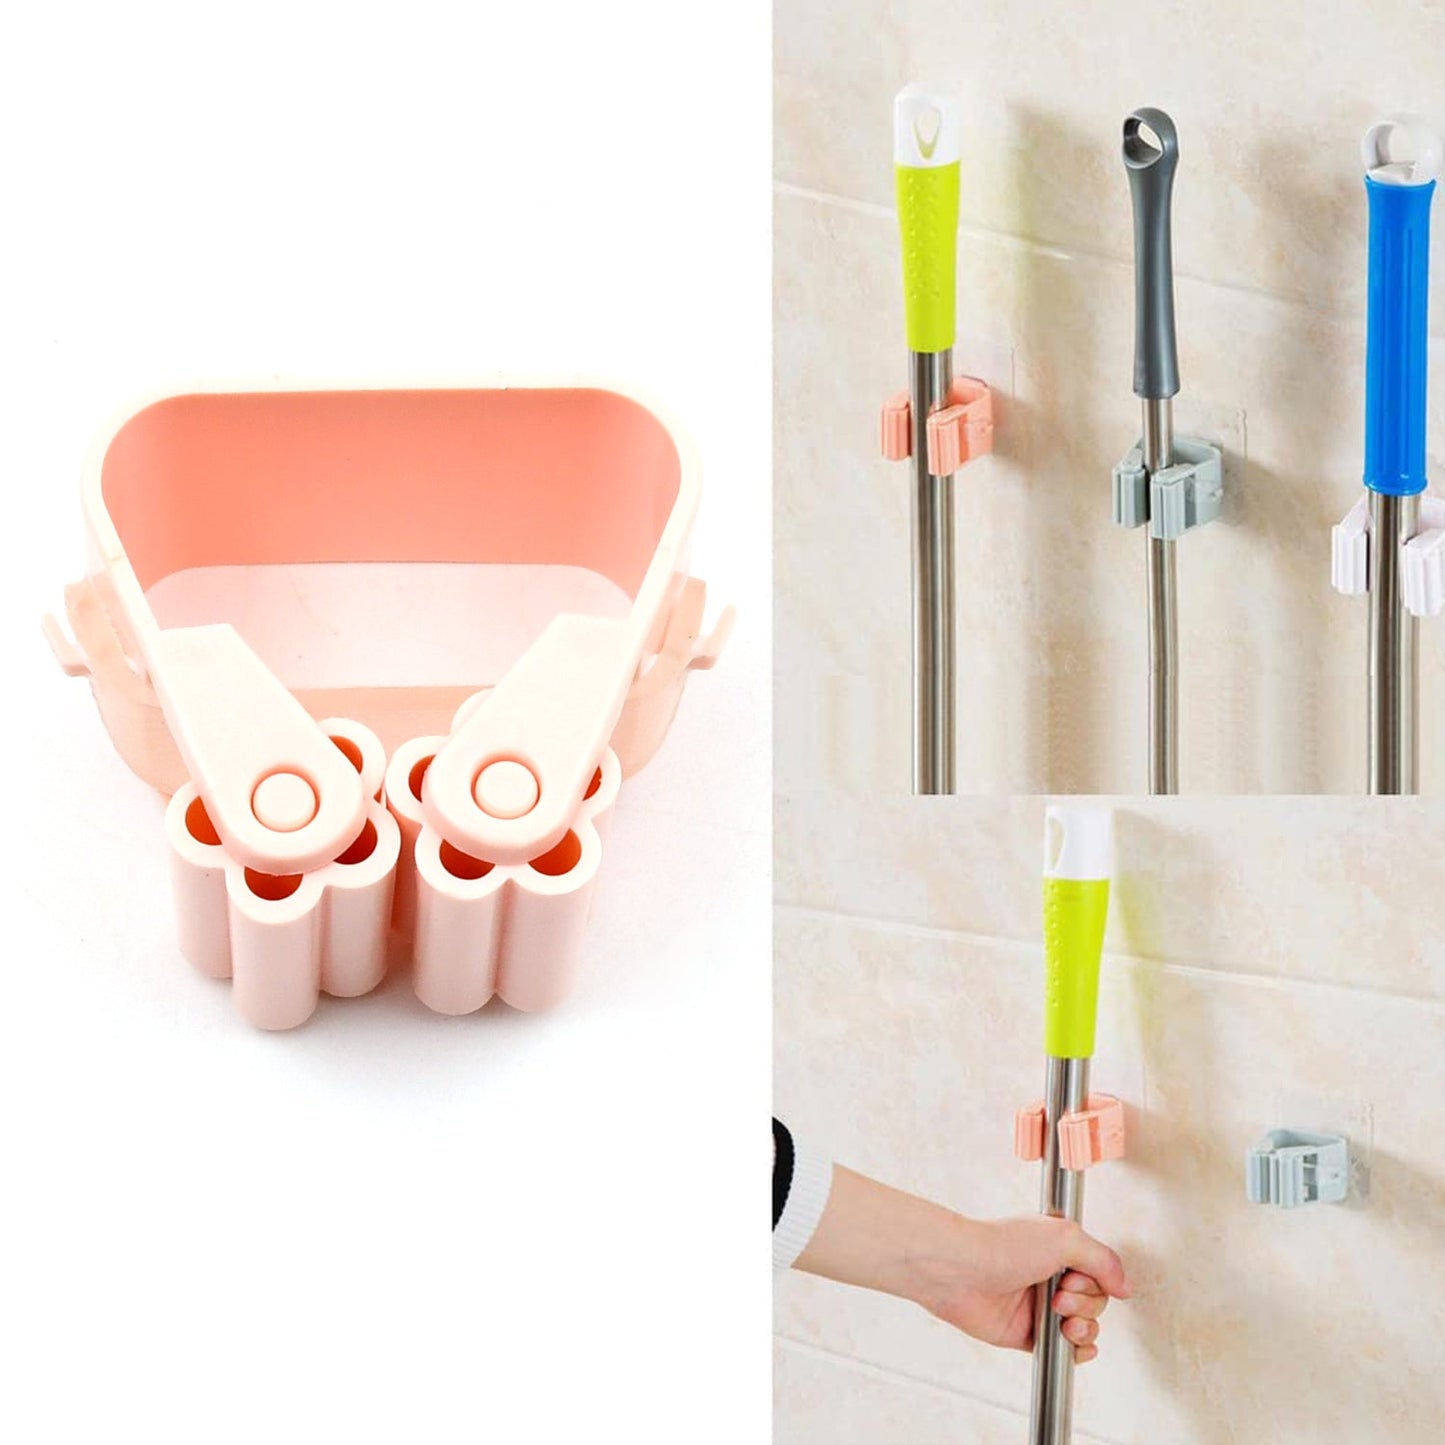 7495 Broom Holder Wall Mounted, Mop and Broom Holder Broom Organizer Grip Clips, No Drilling, Wall Mounted Storage Rack Storage &amp; Organization for Kitchen, Bathroom, Garden (1 Pc)